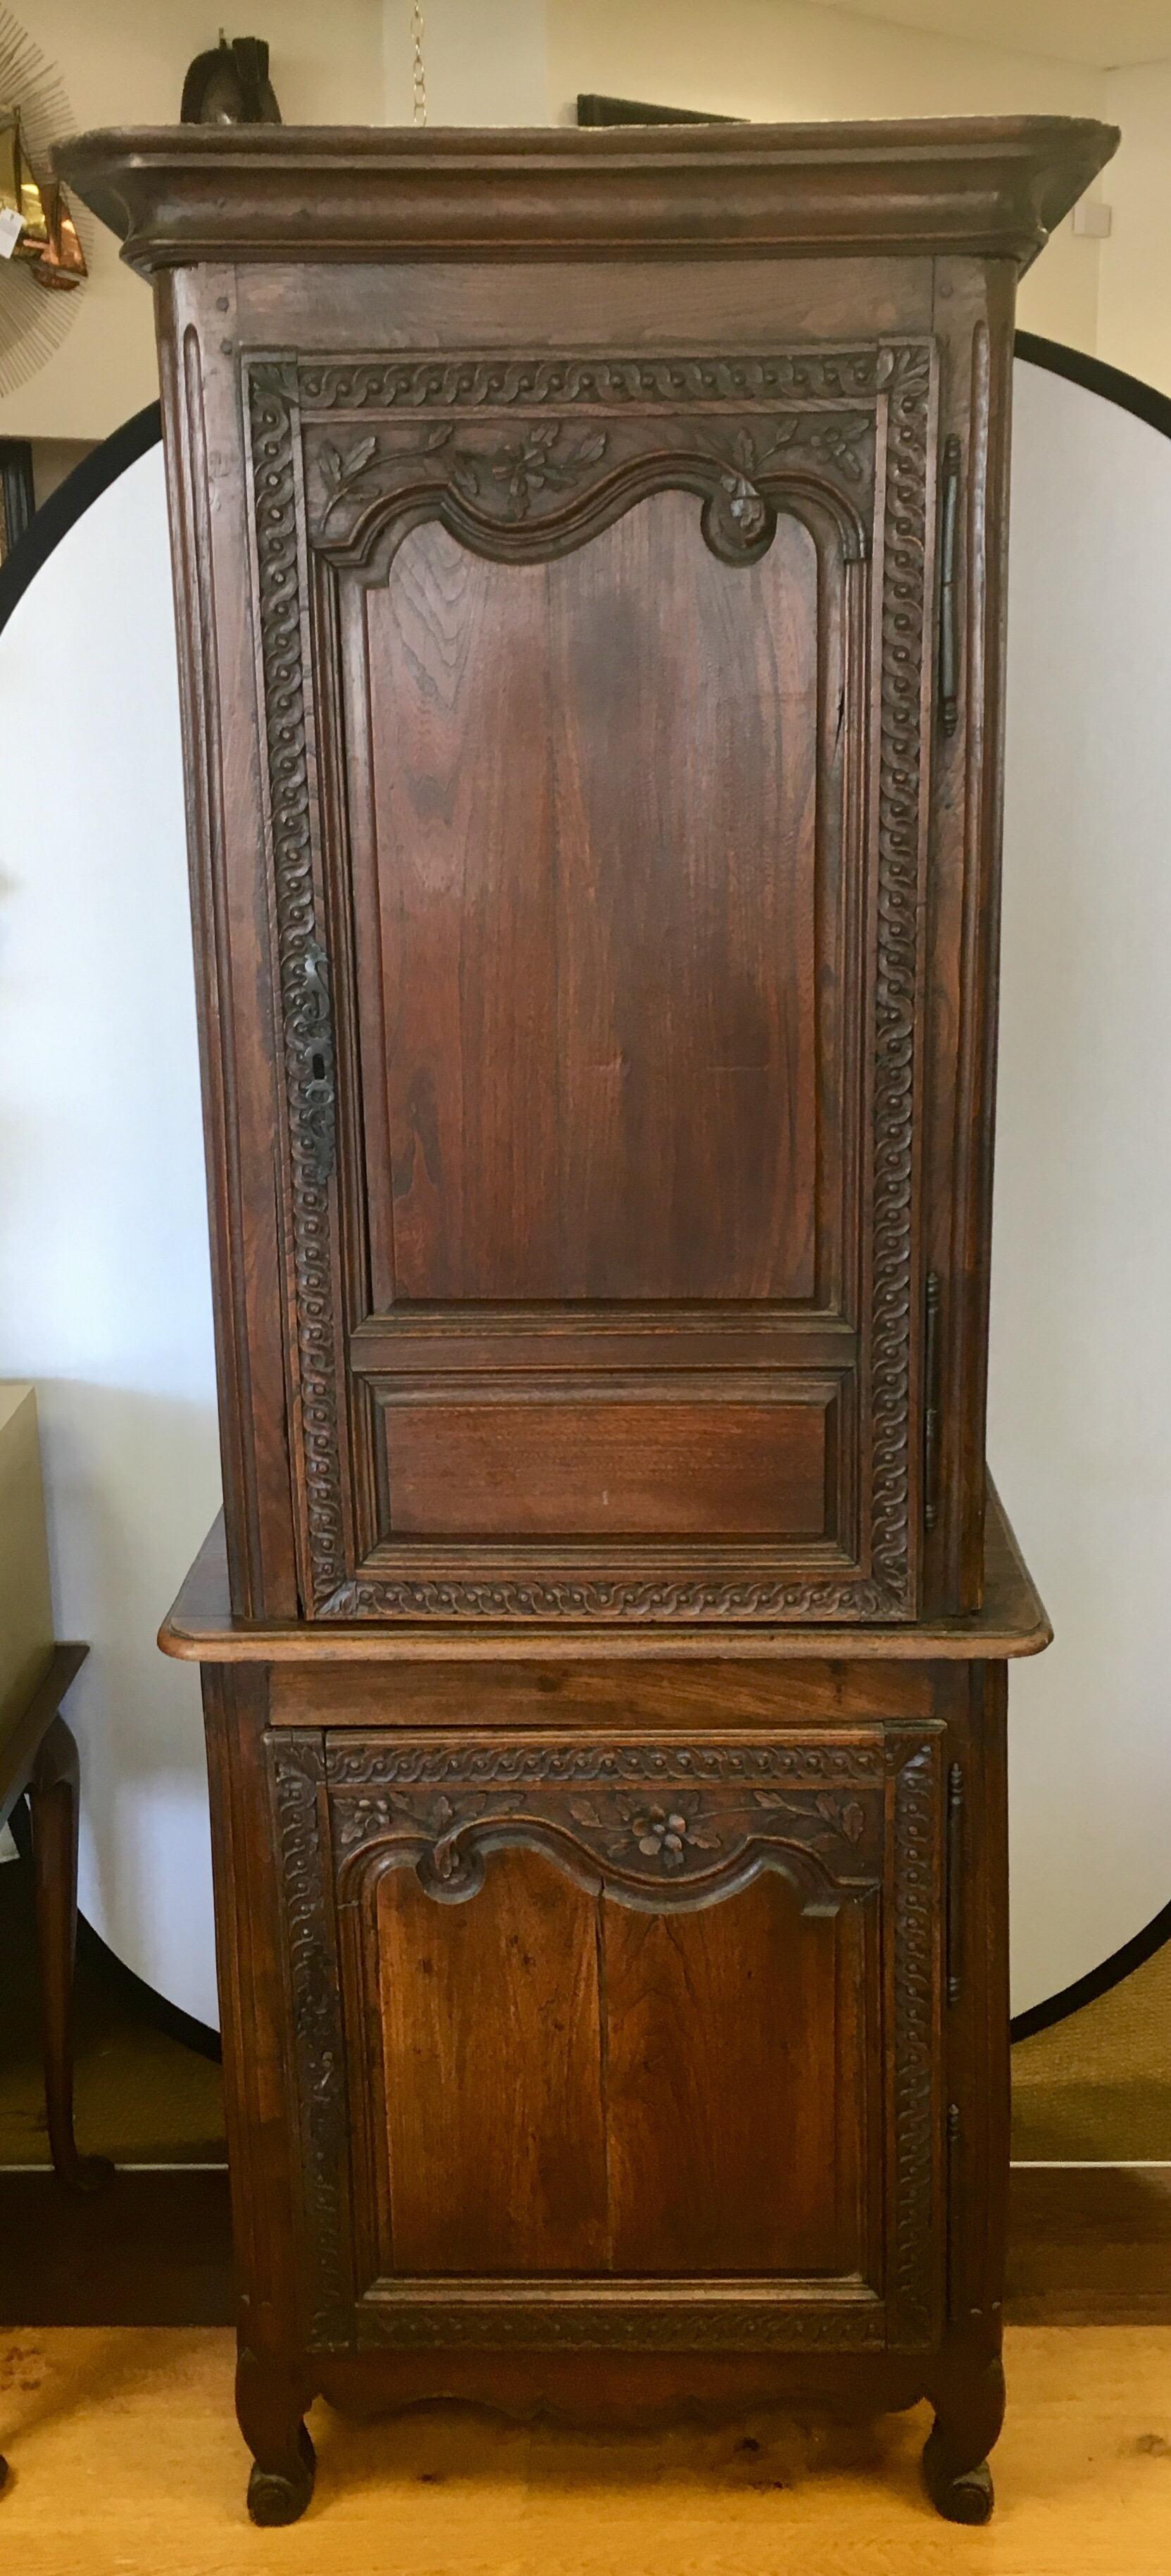 Mid-19th Century Exceptional Carved French Cabinet Armoire Early 19th Century Wardrobe